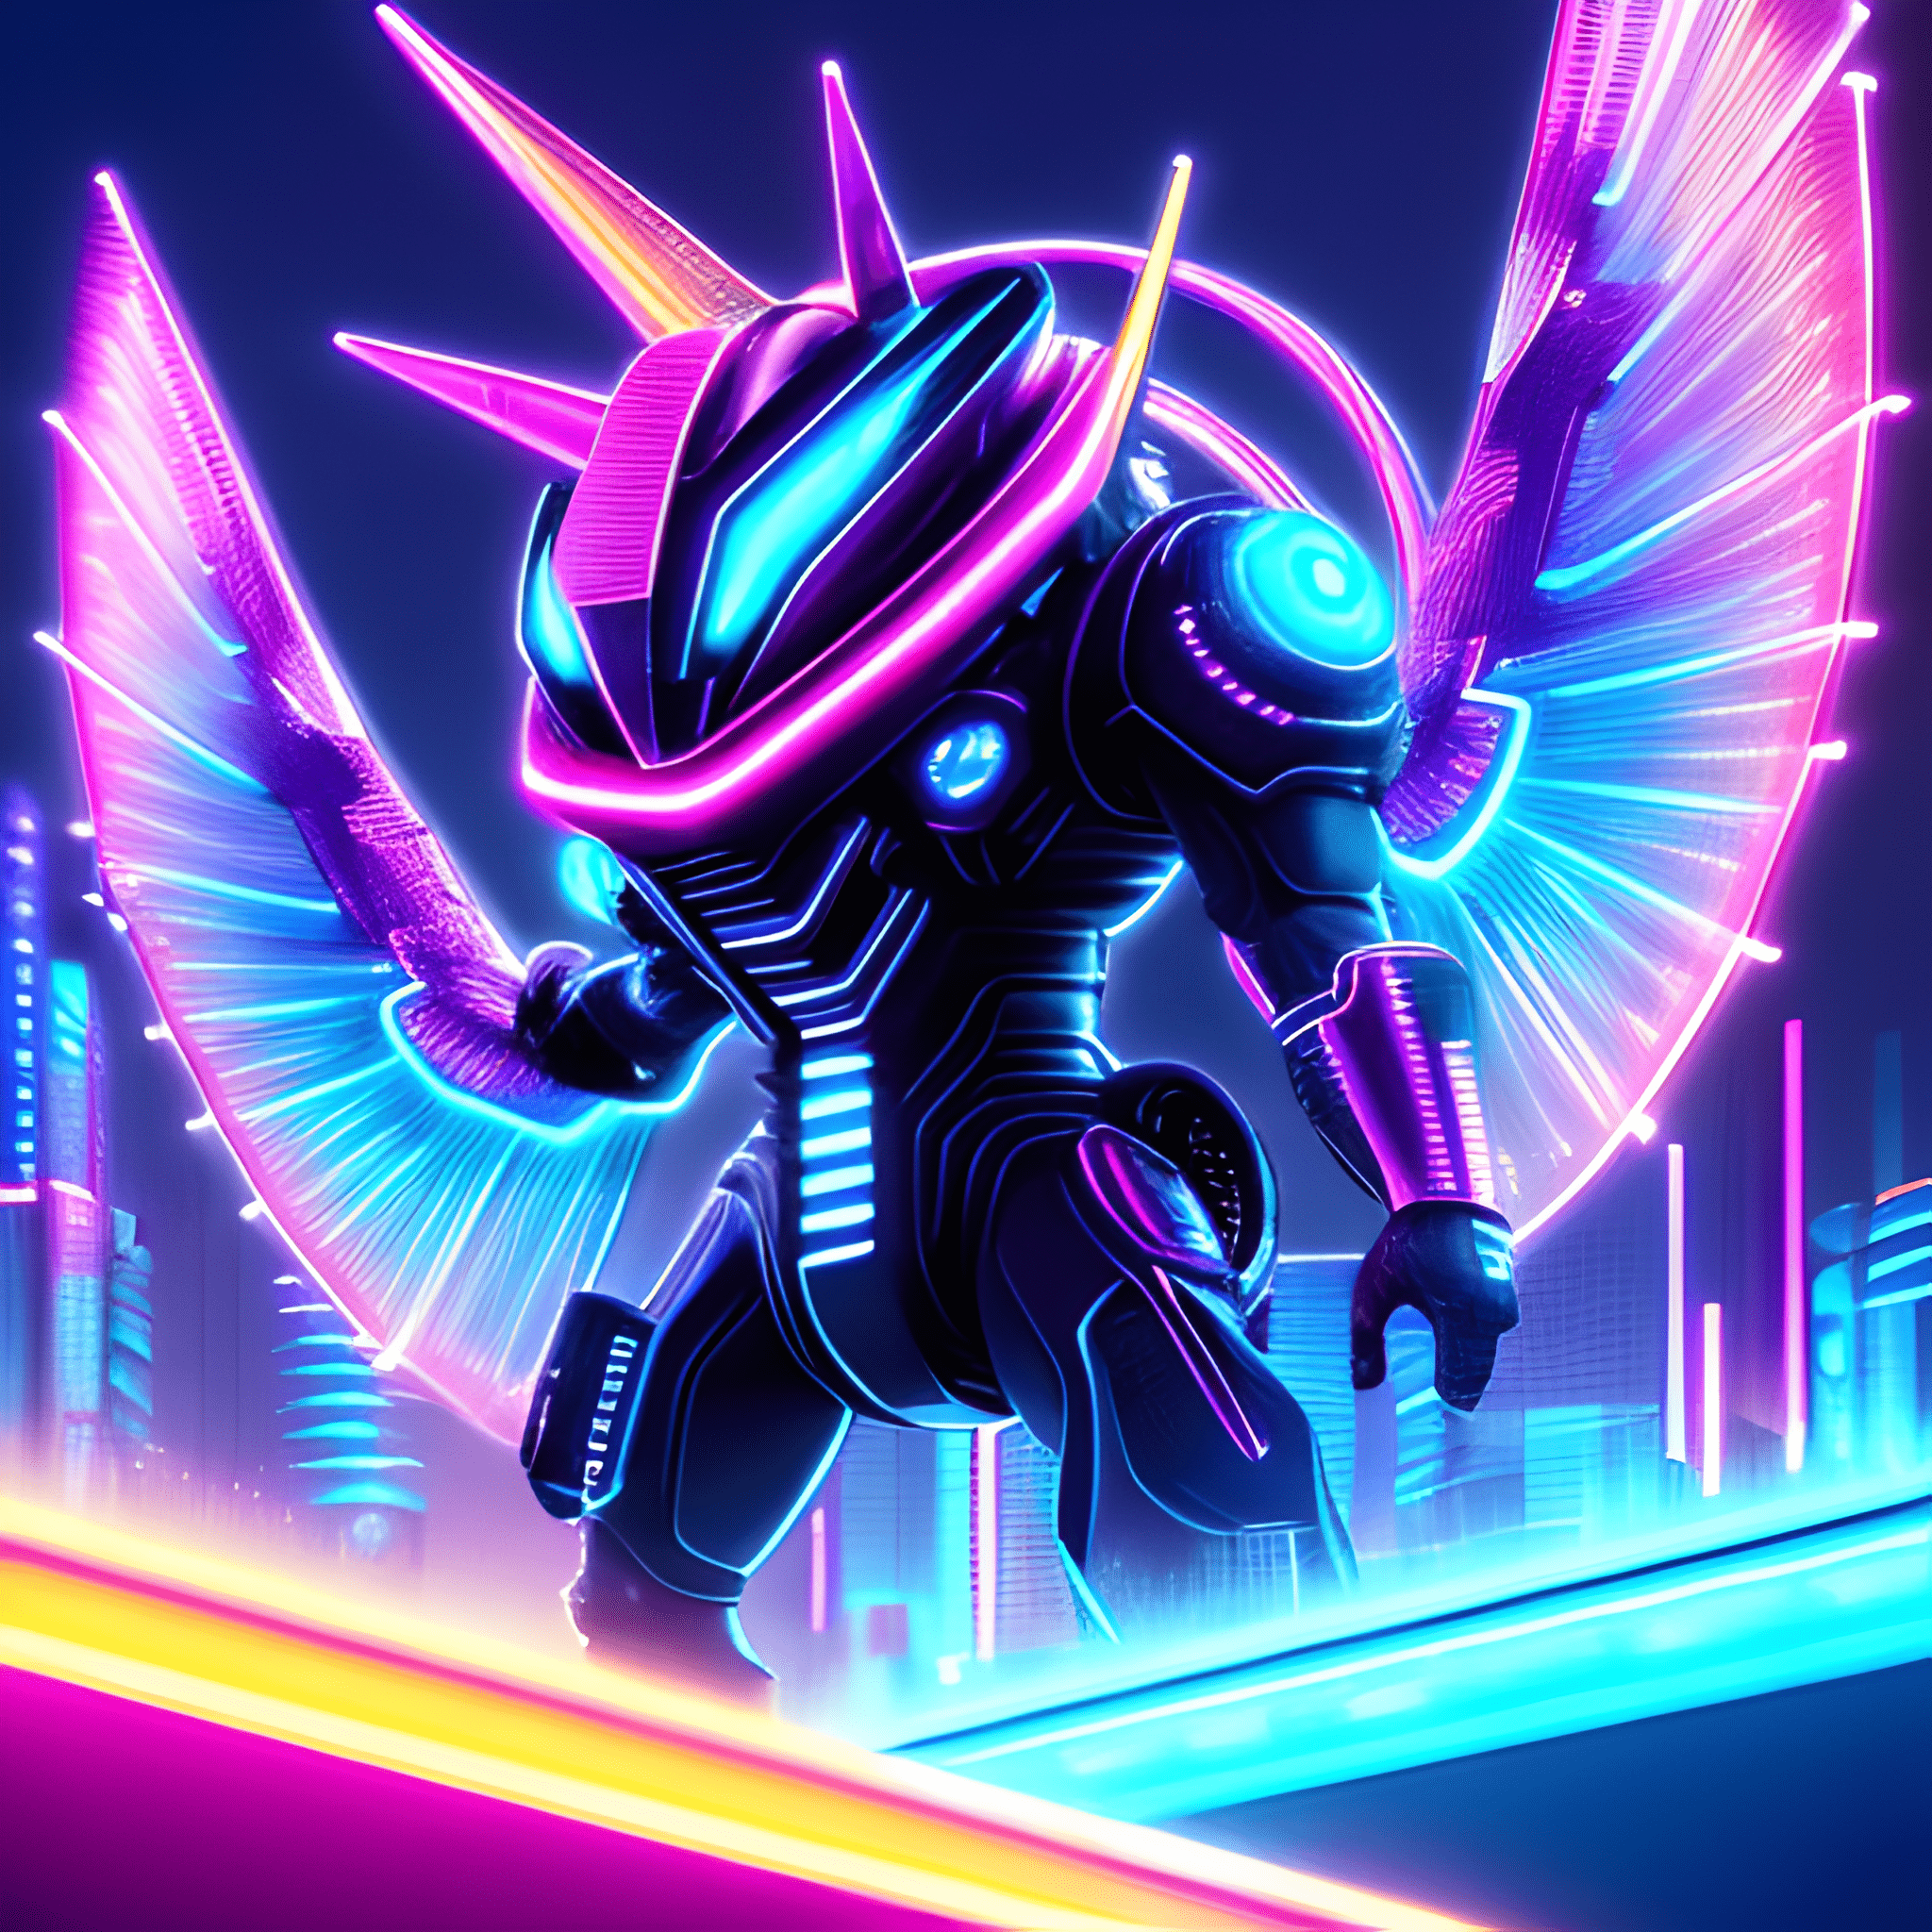 A robot with neon lights on its body and horns on its head stands in front of a city. - Fortnite